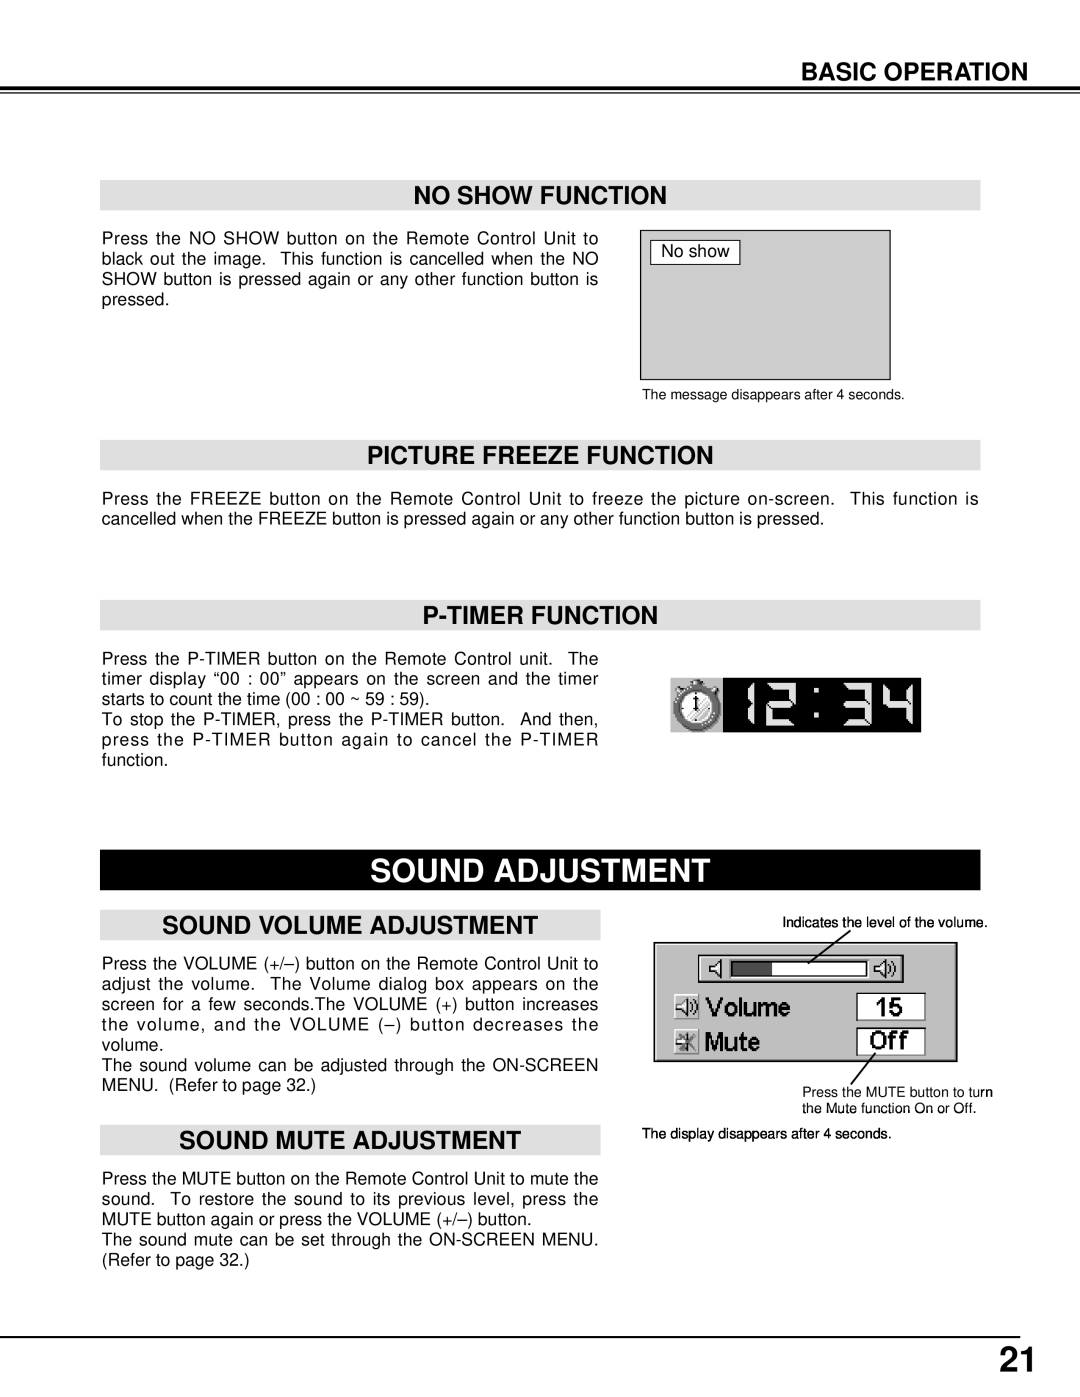 Canon 5100 owner manual Sound Adjustment, Basic Operation No Show Function, Picture Freeze Function, P-Timer Function 